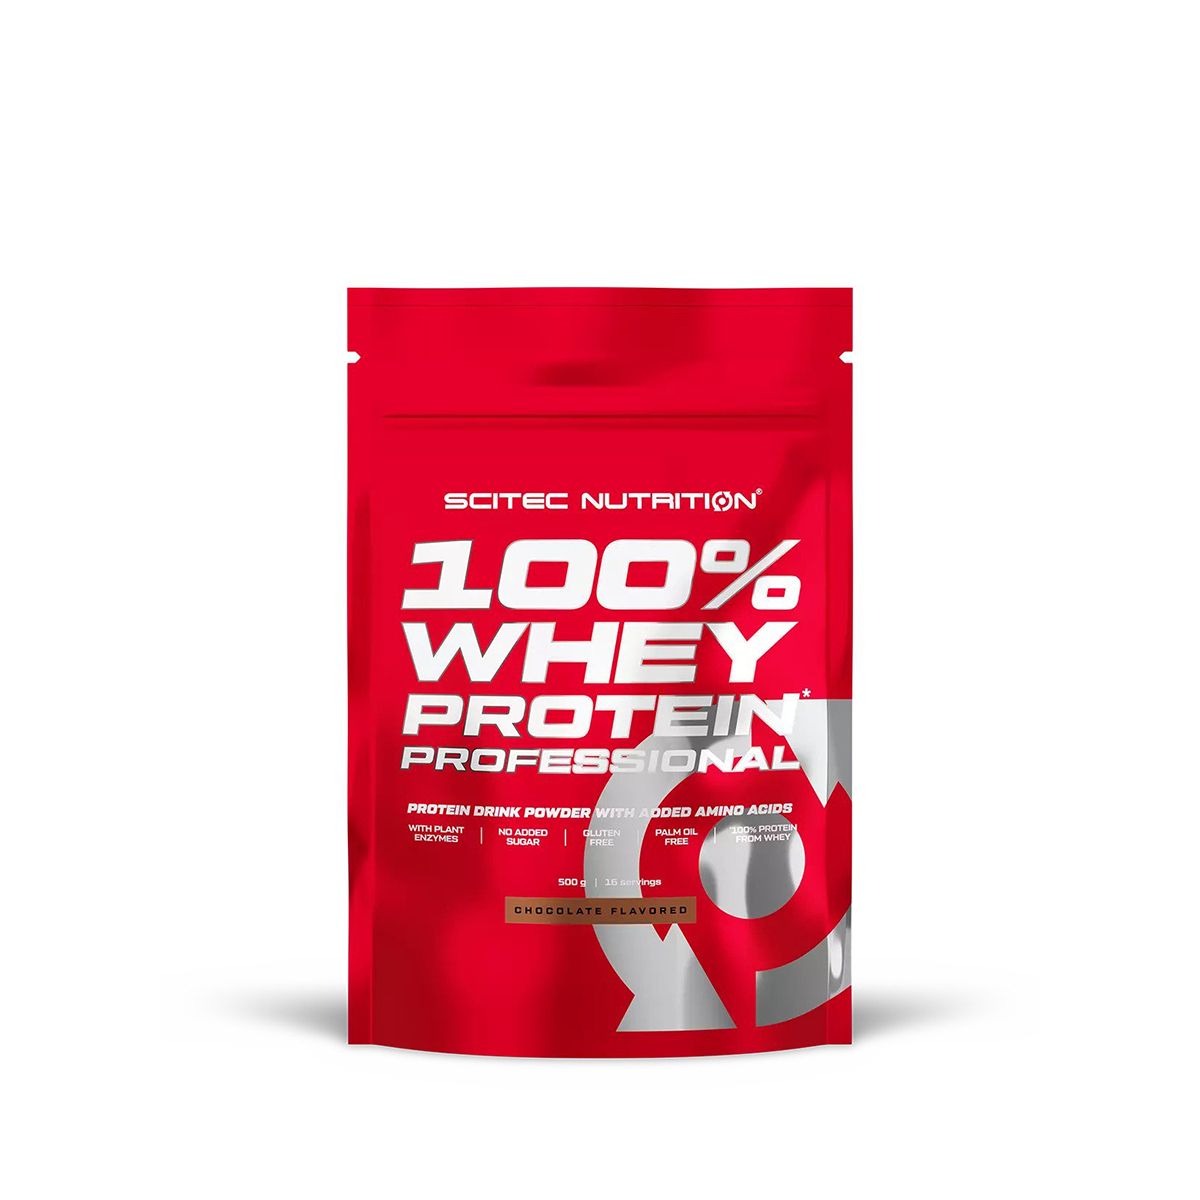 SCITEC NUTRITION - 100% WHEY PROTEIN PROFESSIONAL - 500 G